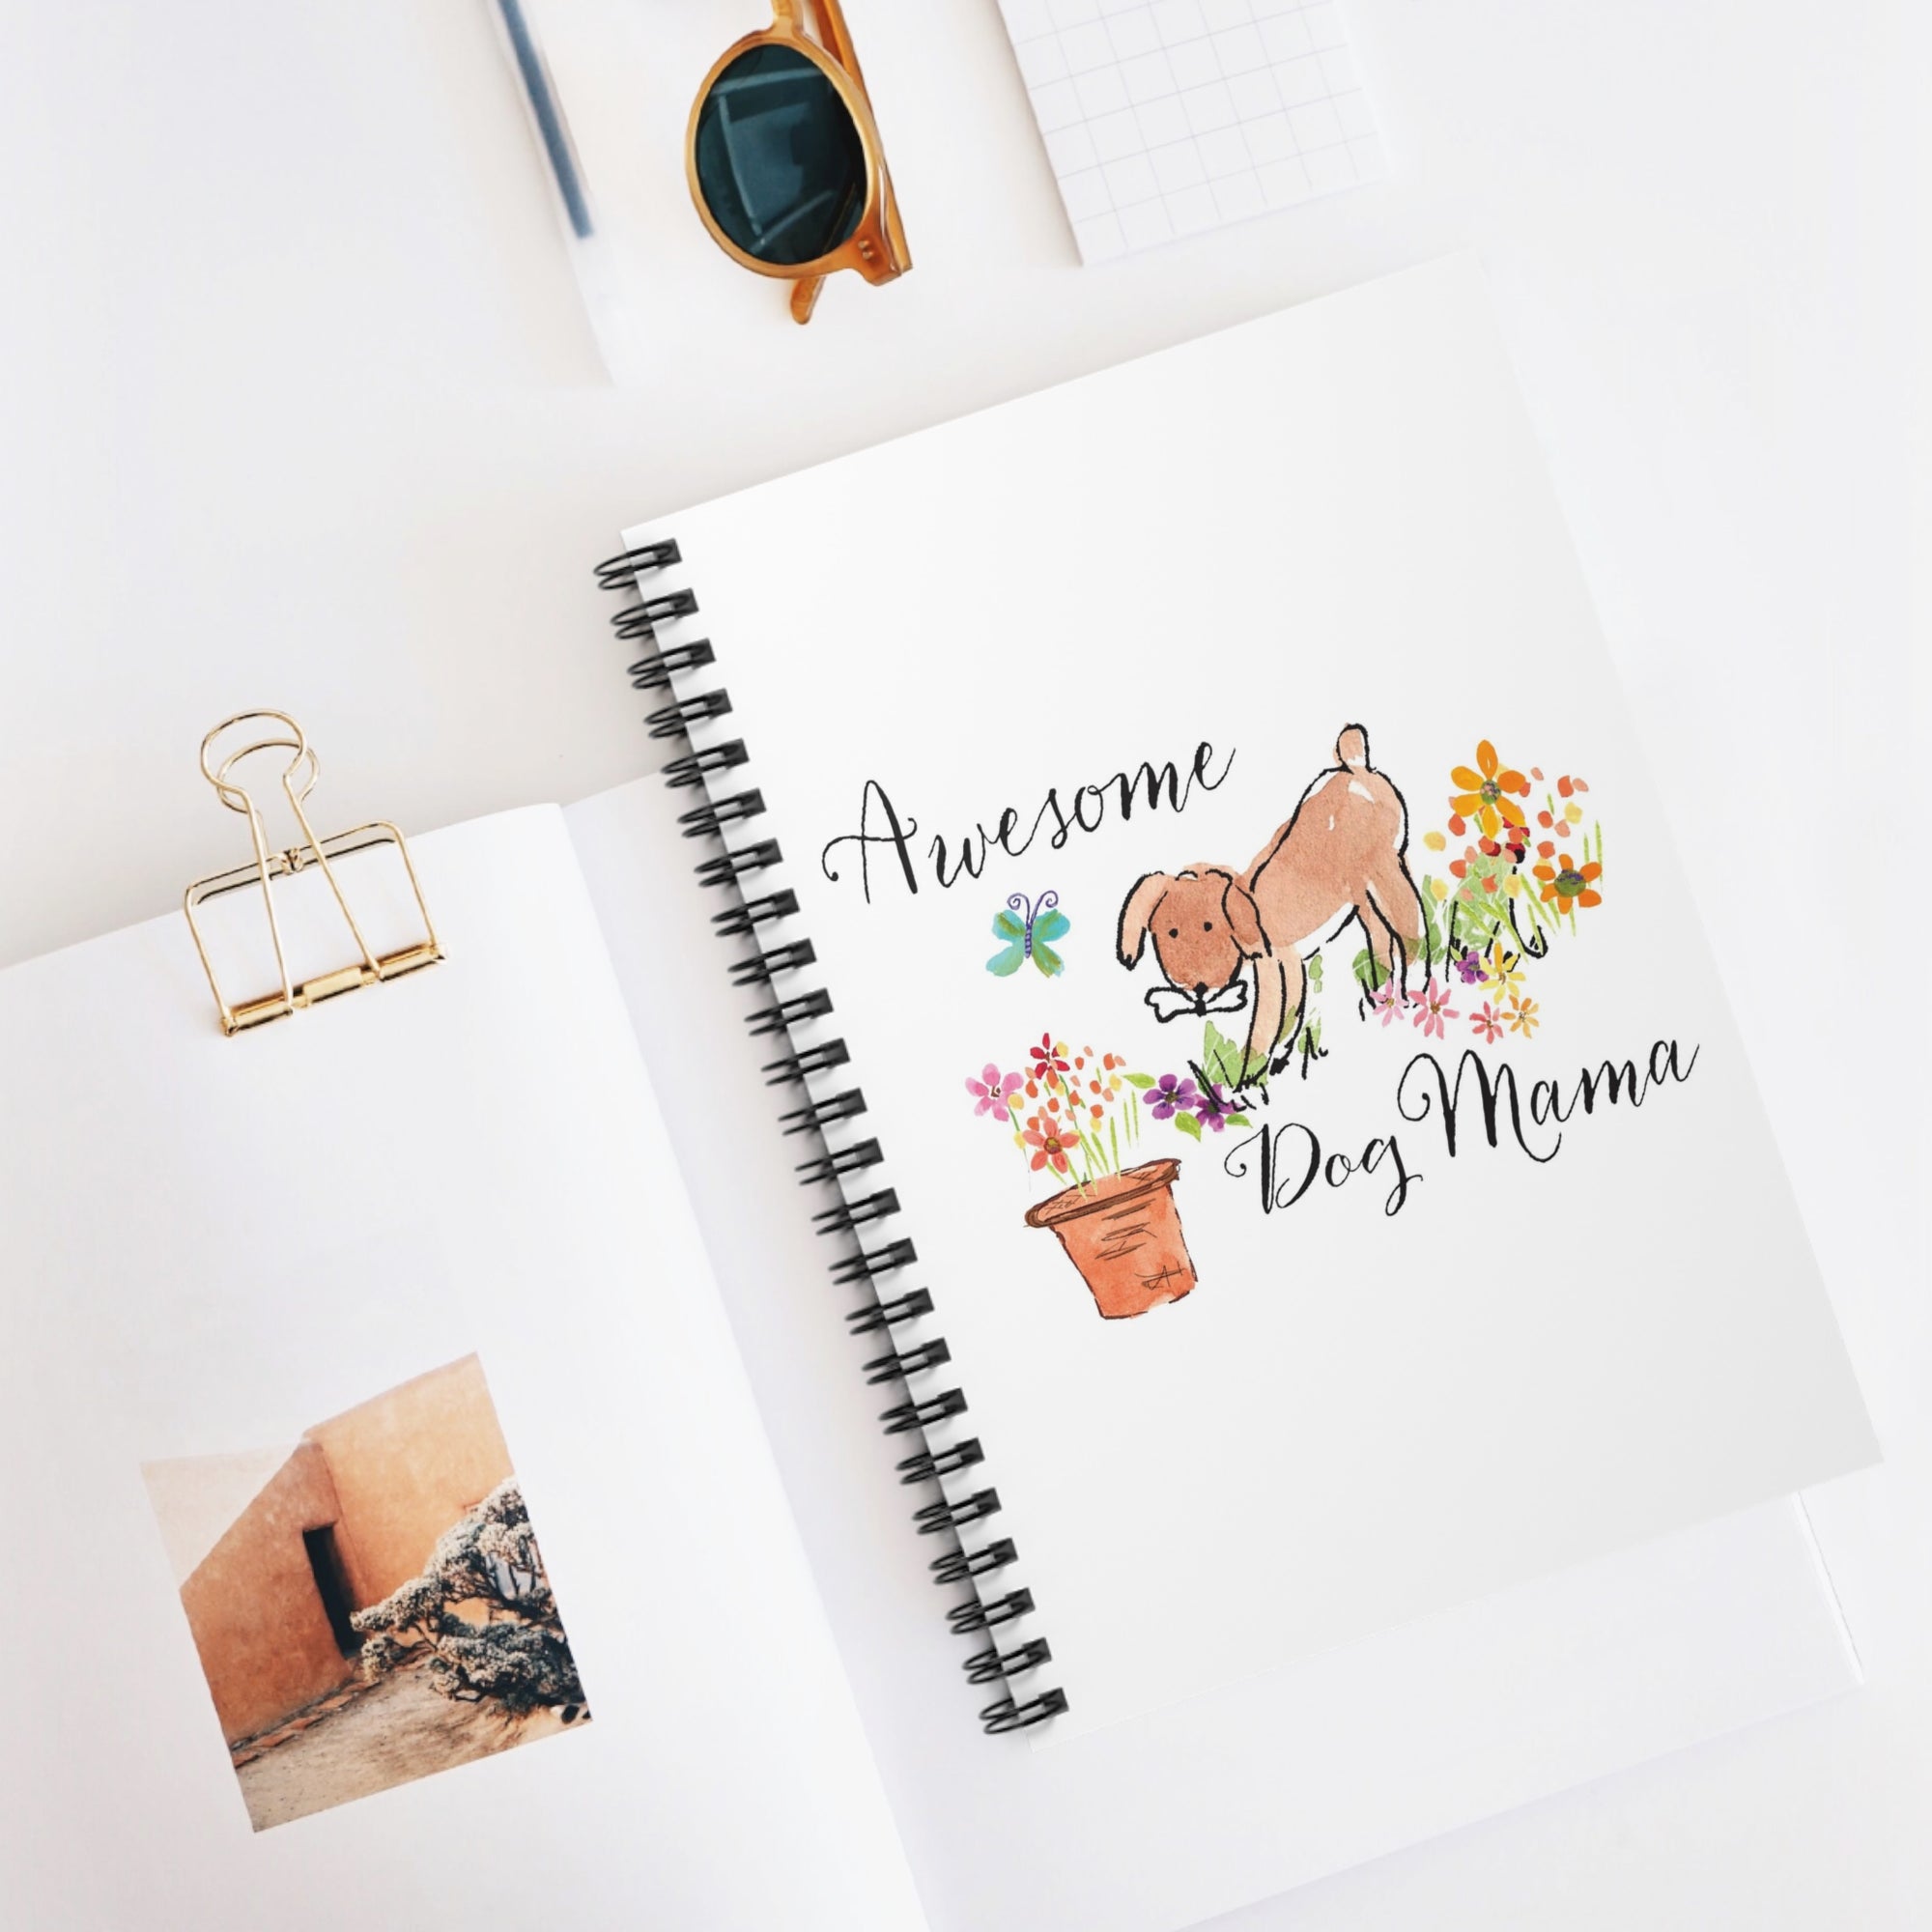 Awesome Dog Mama Spiral Notebook - Ruled Line